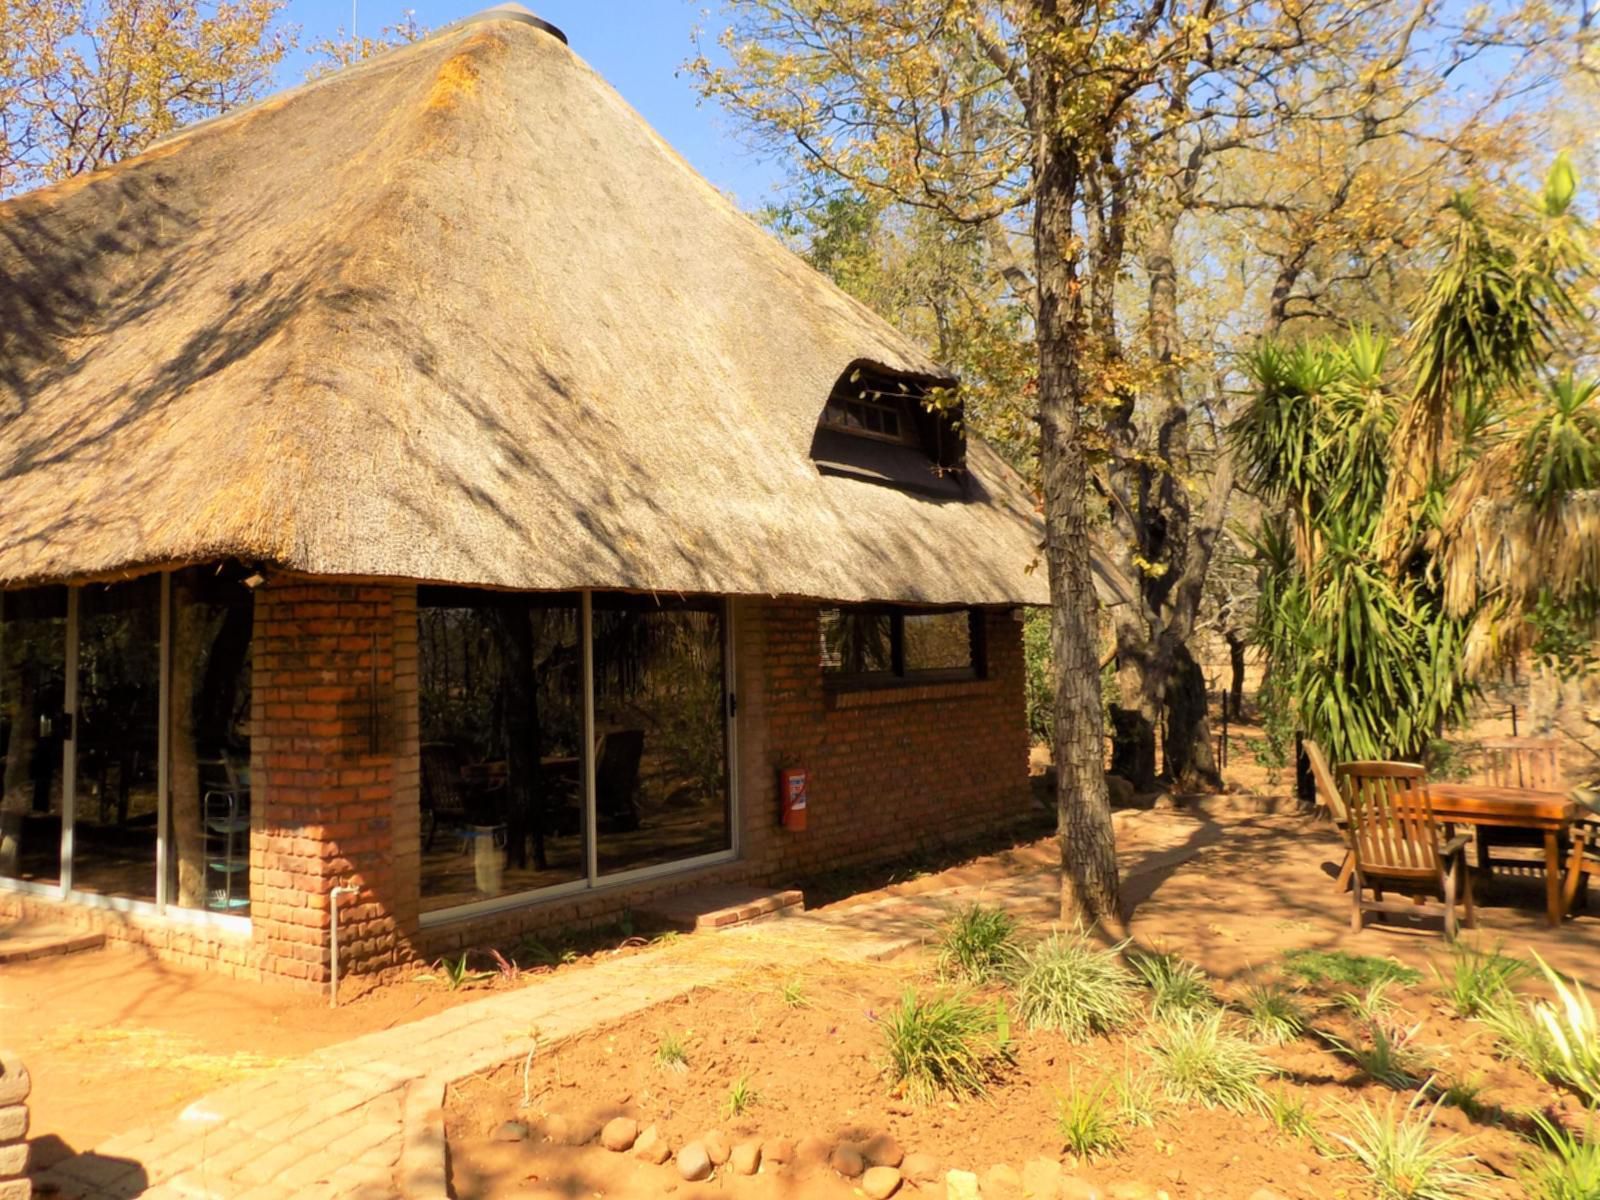 Limpokwena Nature Reserve Alldays Limpopo Province South Africa Colorful, Building, Architecture, Cabin